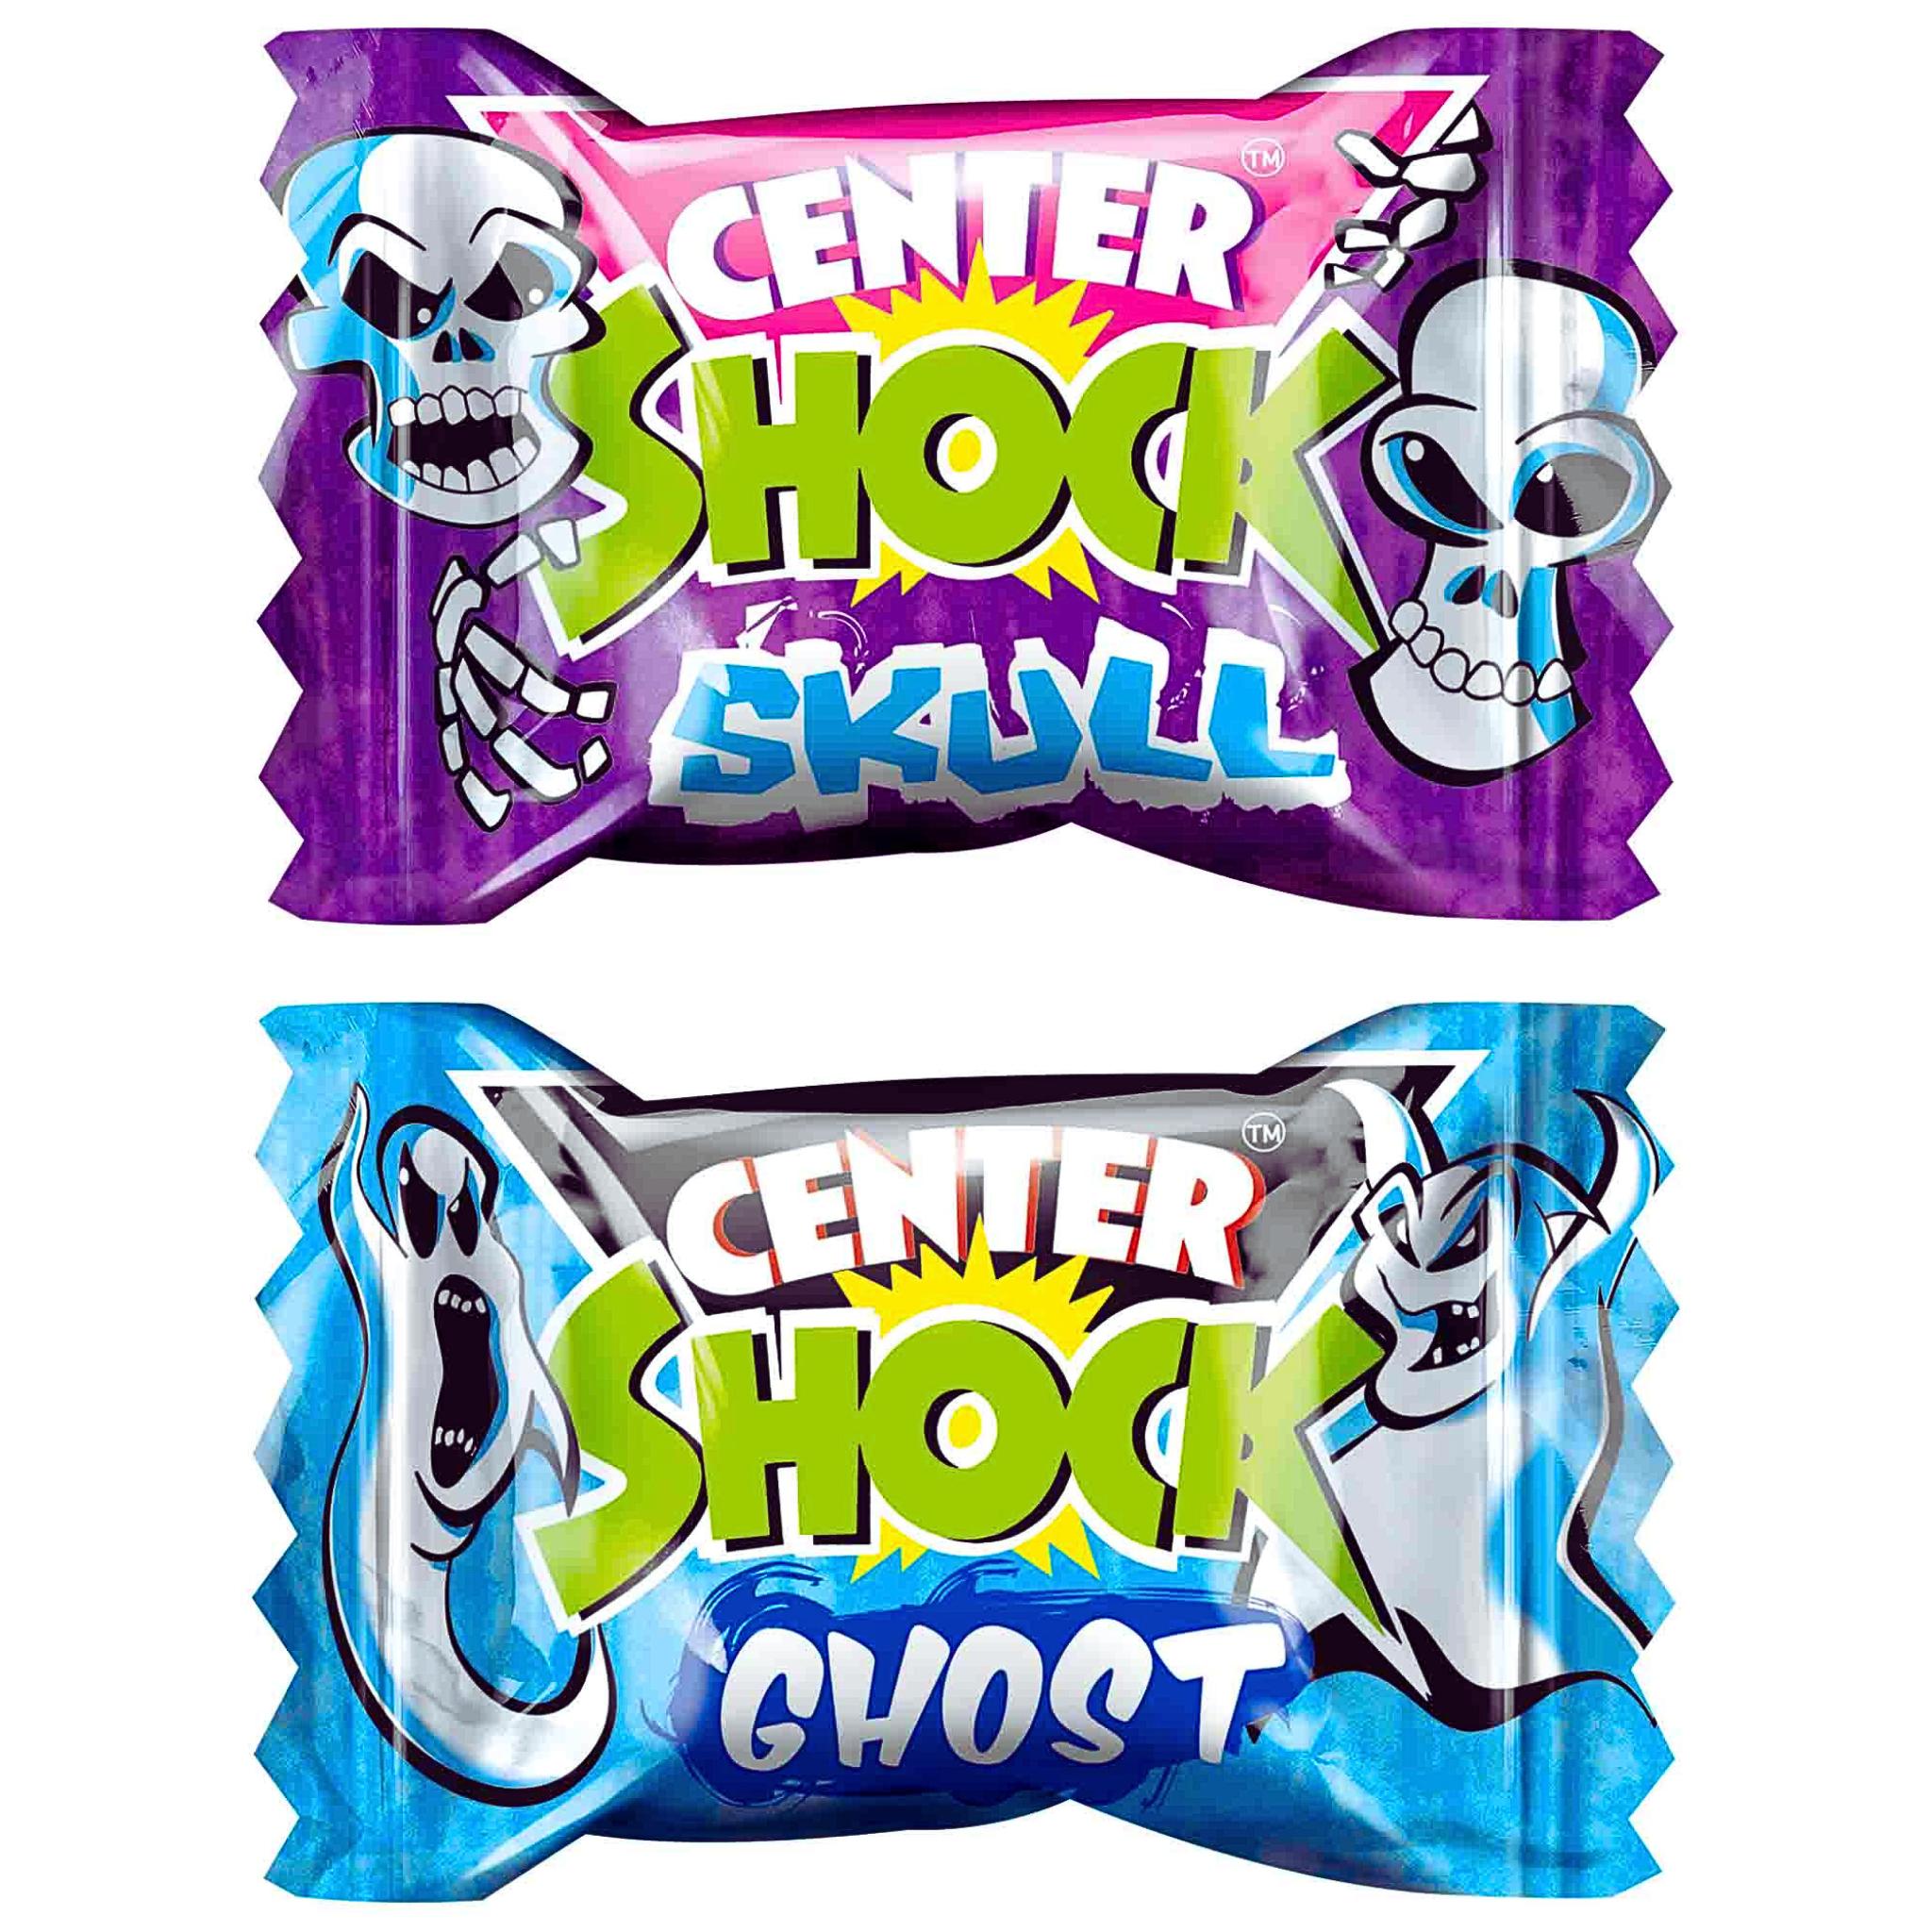 Center Shock Scary Mix - 4g